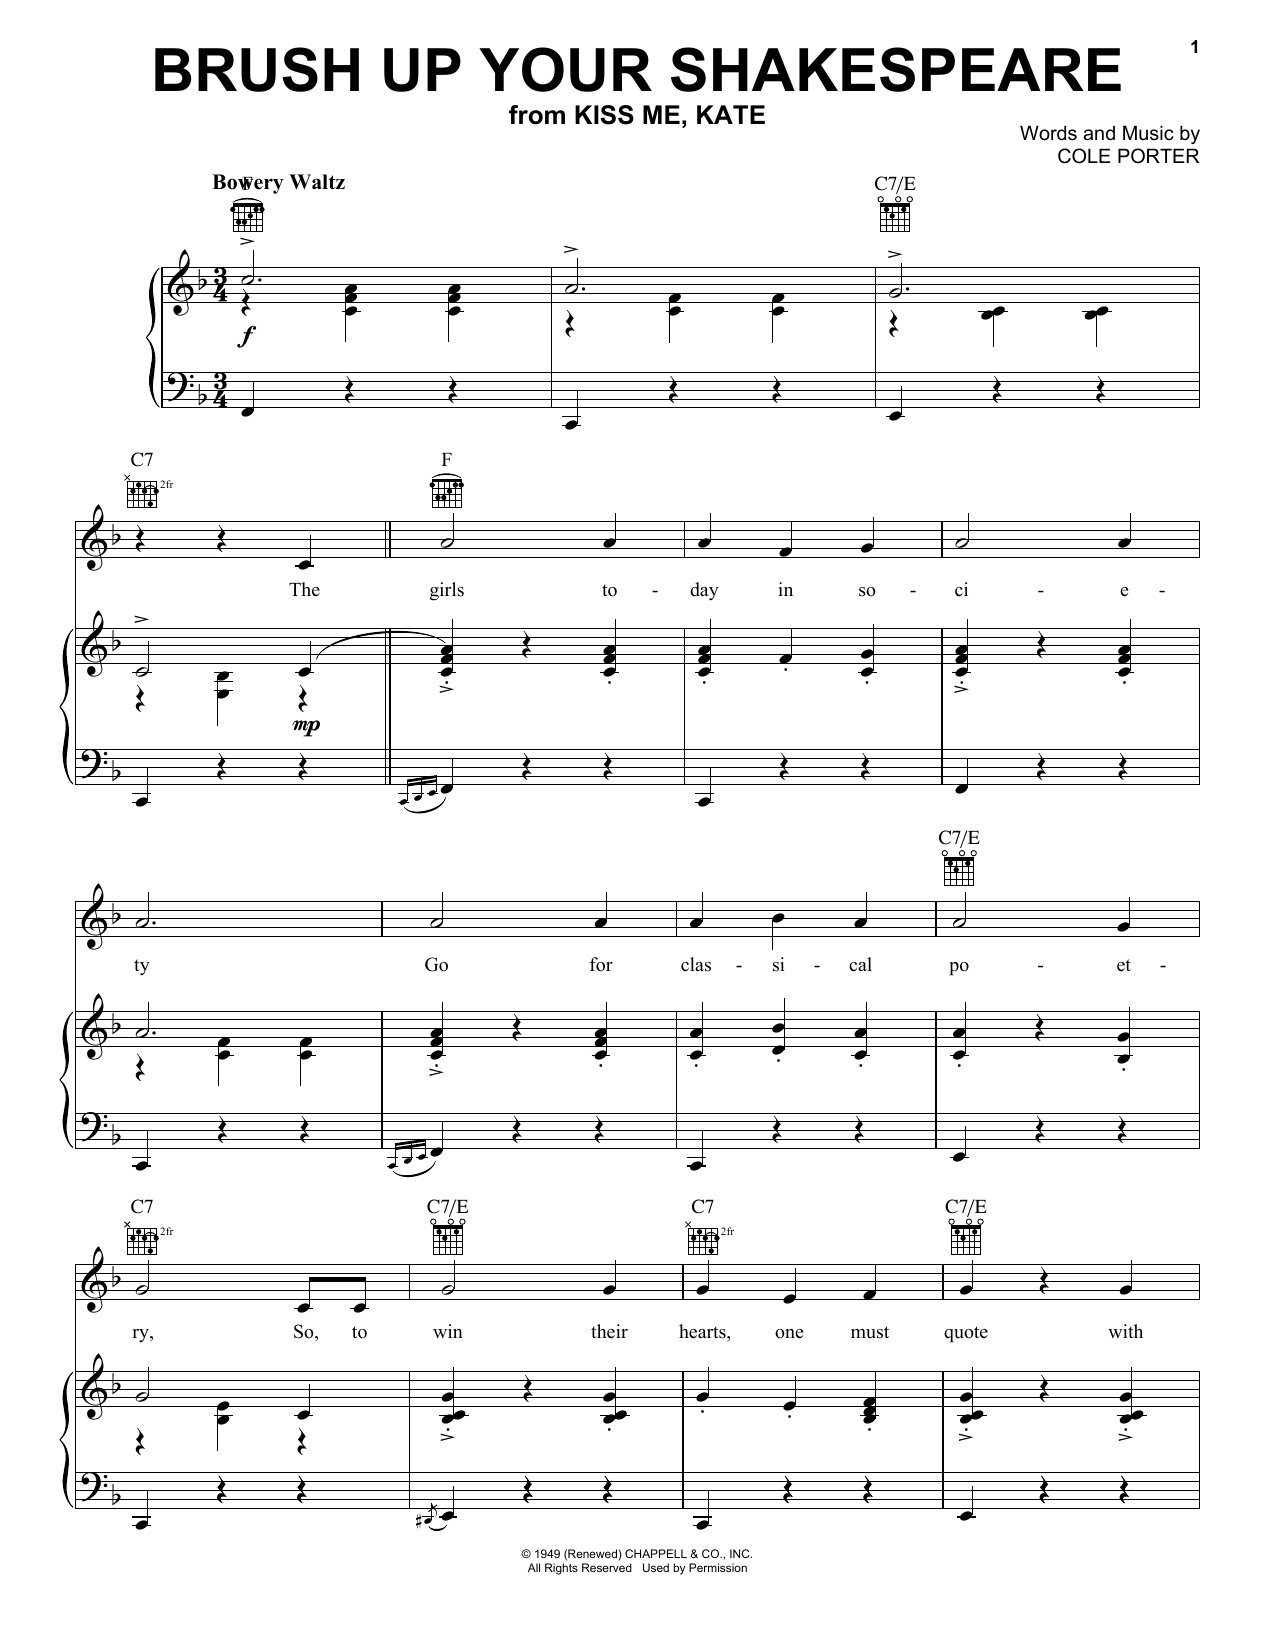 Cole Porter Brush Up Your Shakespeare (from Kiss Me, Kate) sheet music notes printable PDF score